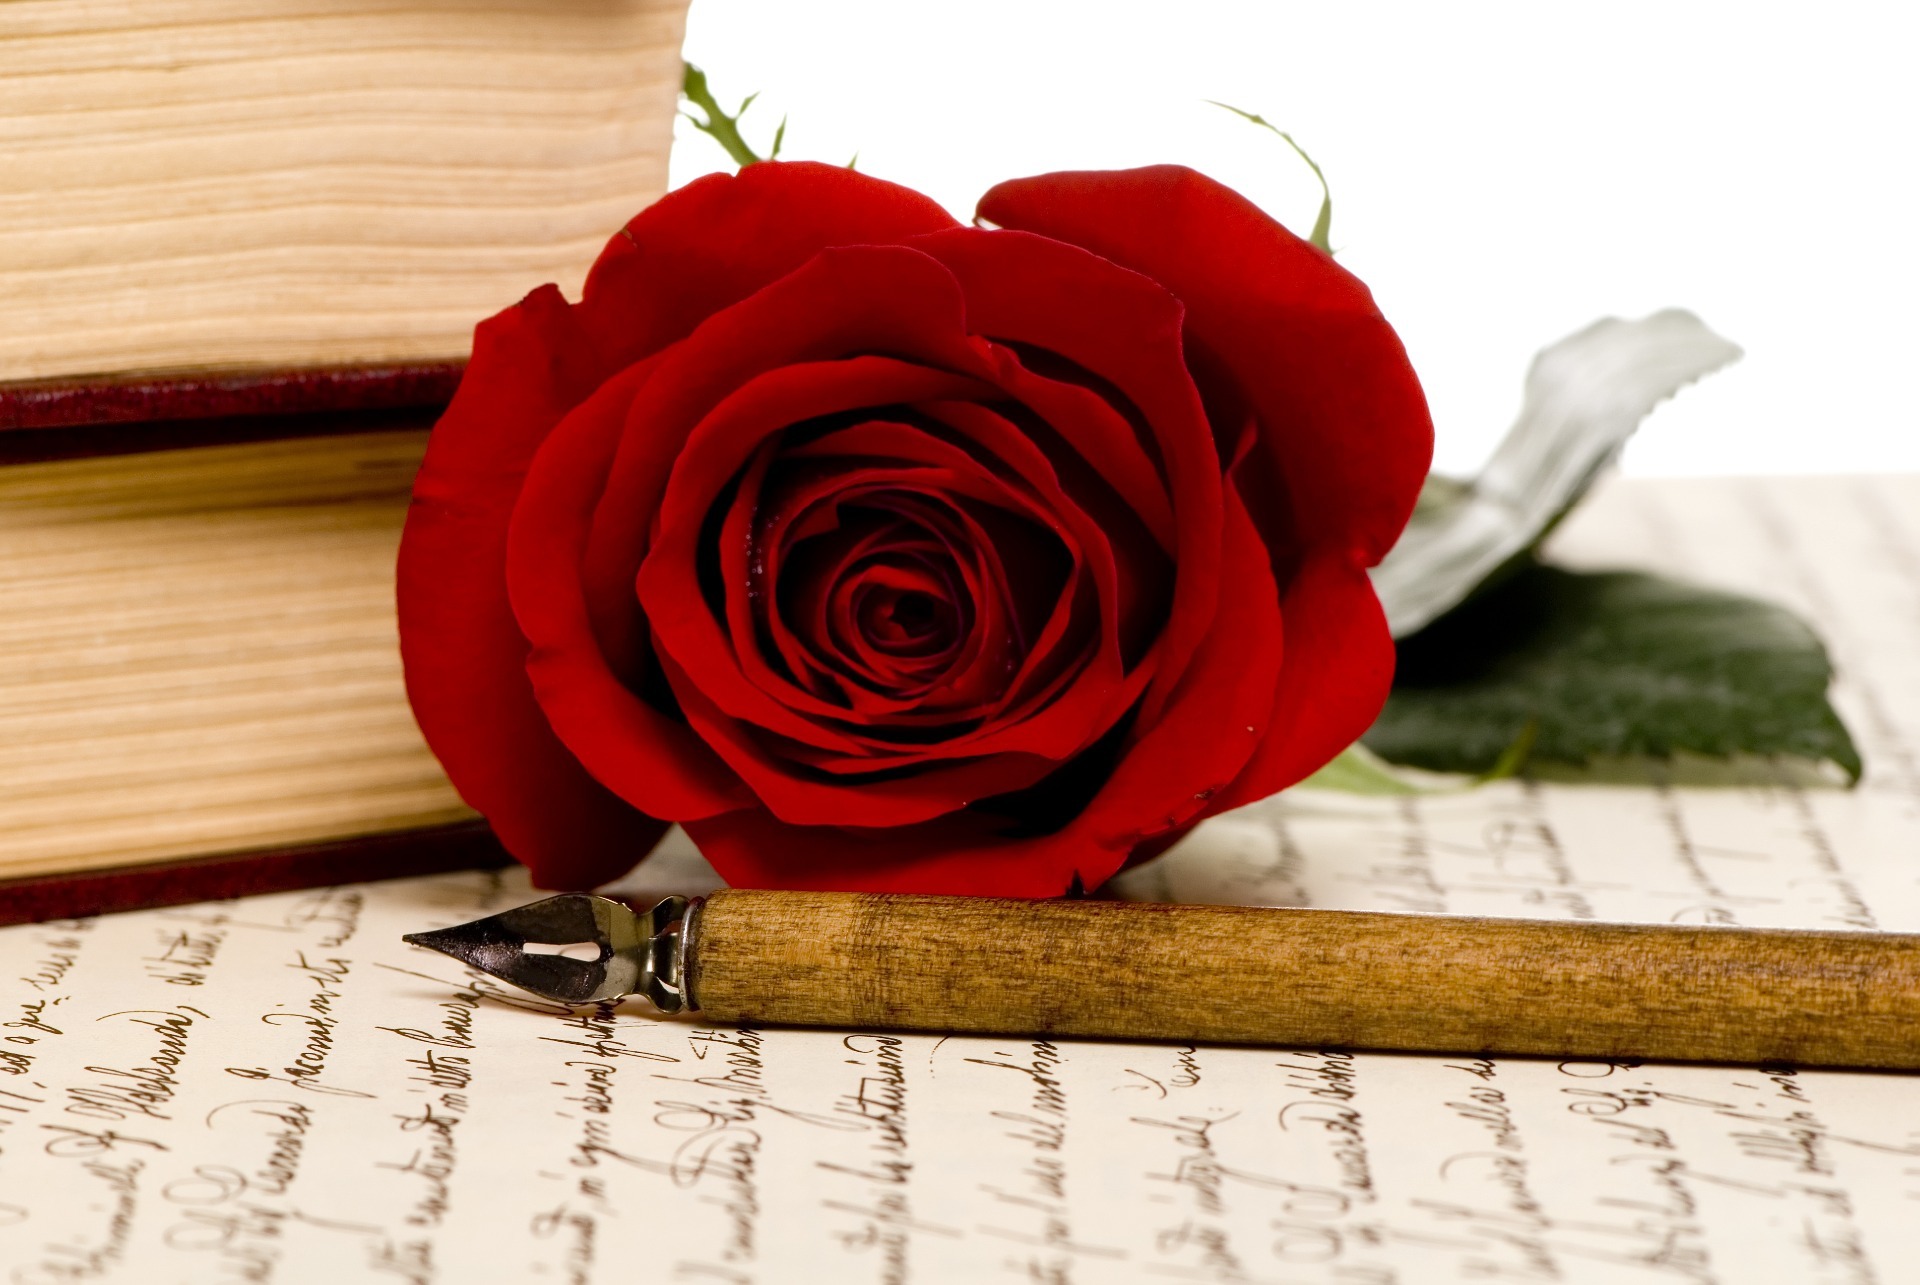 A red rose resting on top of a Will.